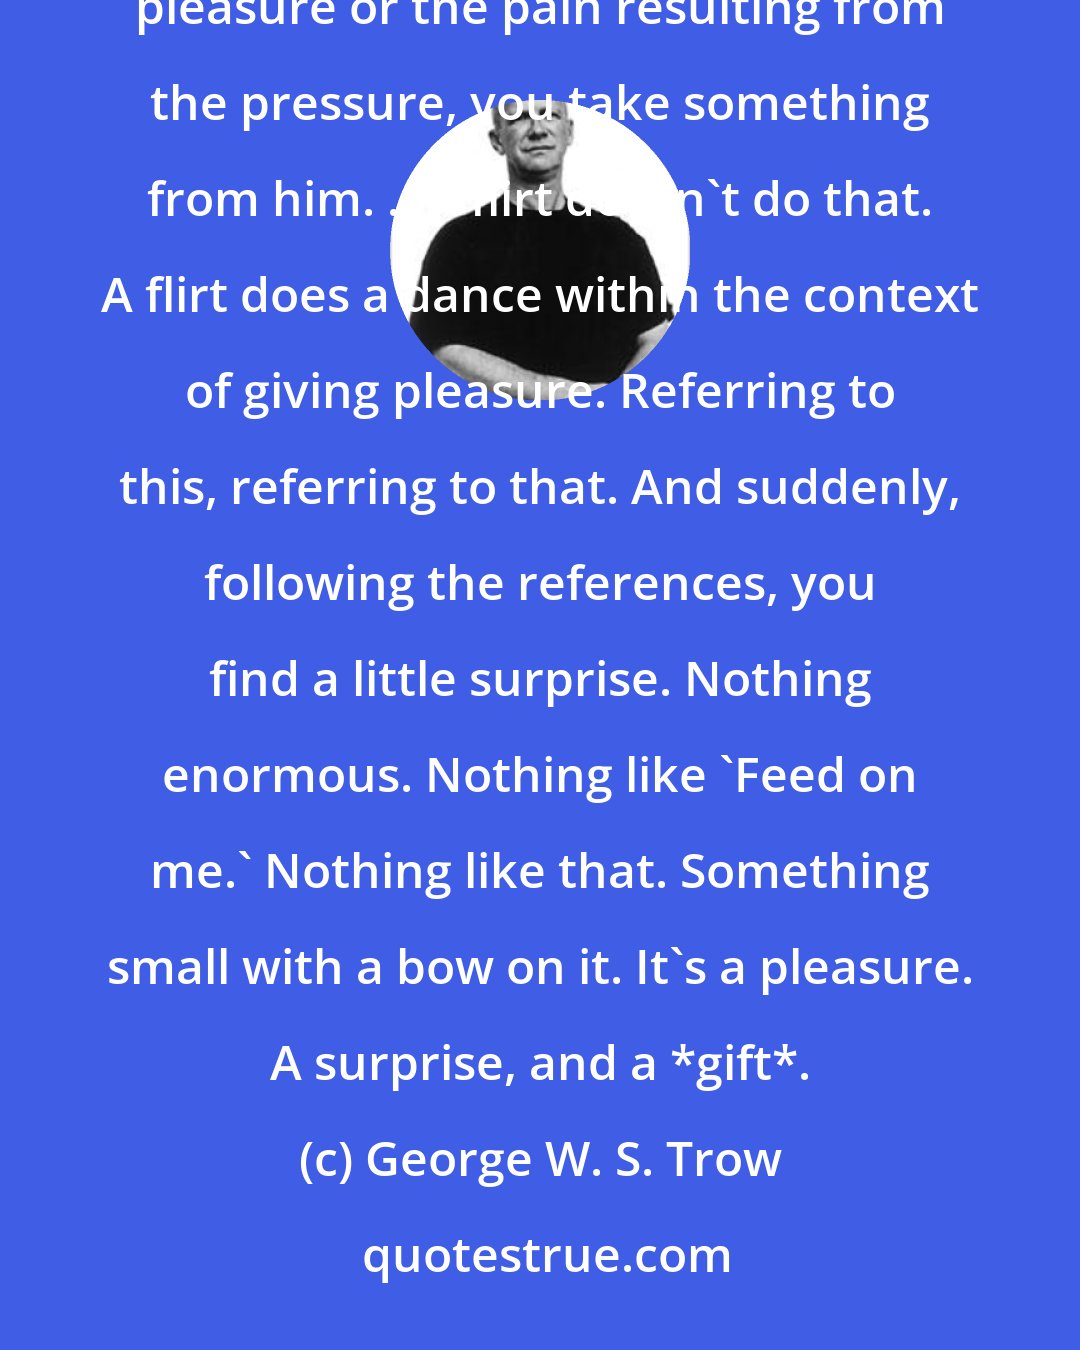 George W. S. Trow: A tease is a con. You press a spot because you know that it can be pressed, and while the sucker is feeling the pleasure or the pain resulting from the pressure, you take something from him. ...A flirt doesn't do that. A flirt does a dance within the context of giving pleasure. Referring to this, referring to that. And suddenly, following the references, you find a little surprise. Nothing enormous. Nothing like 'Feed on me.' Nothing like that. Something small with a bow on it. It's a pleasure. A surprise, and a *gift*.